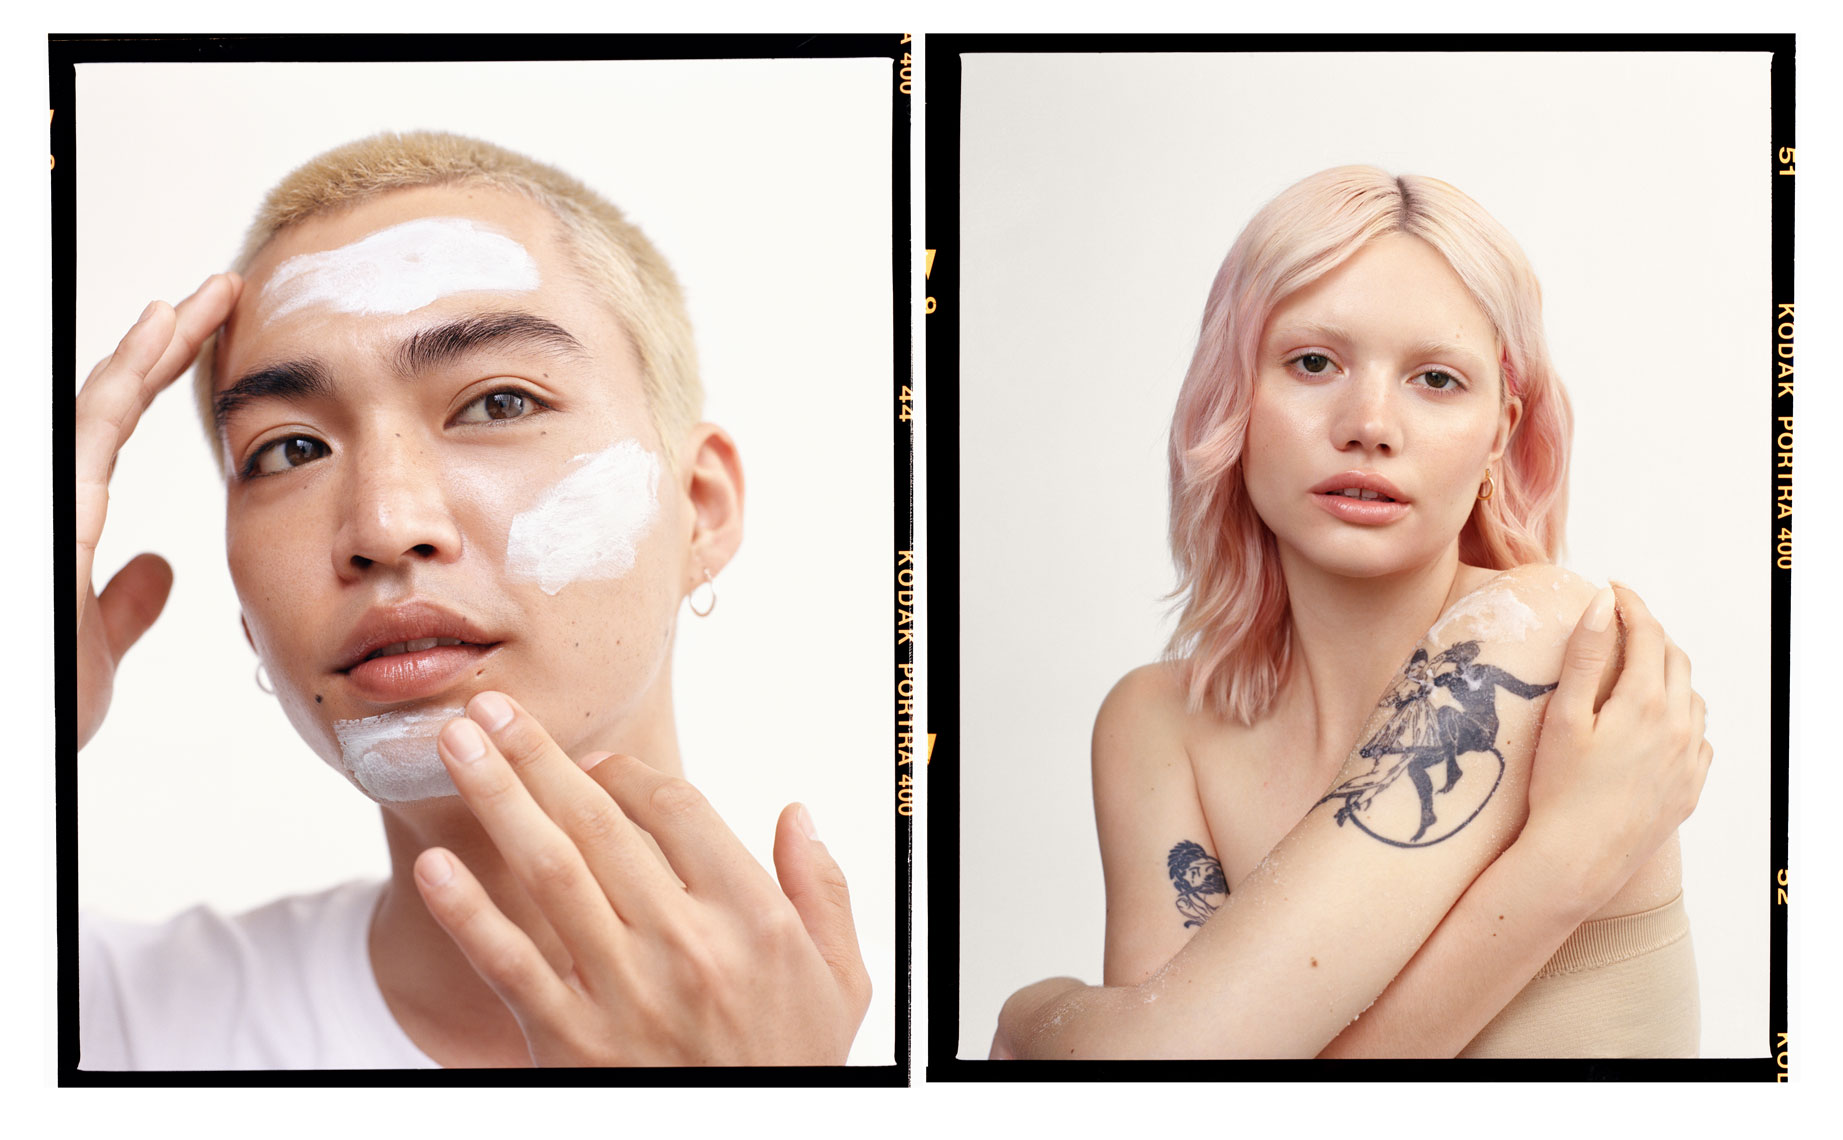 issie-gibbons-fashion-stylist-primark-campaign-facemask-mens-beuaty-skincare